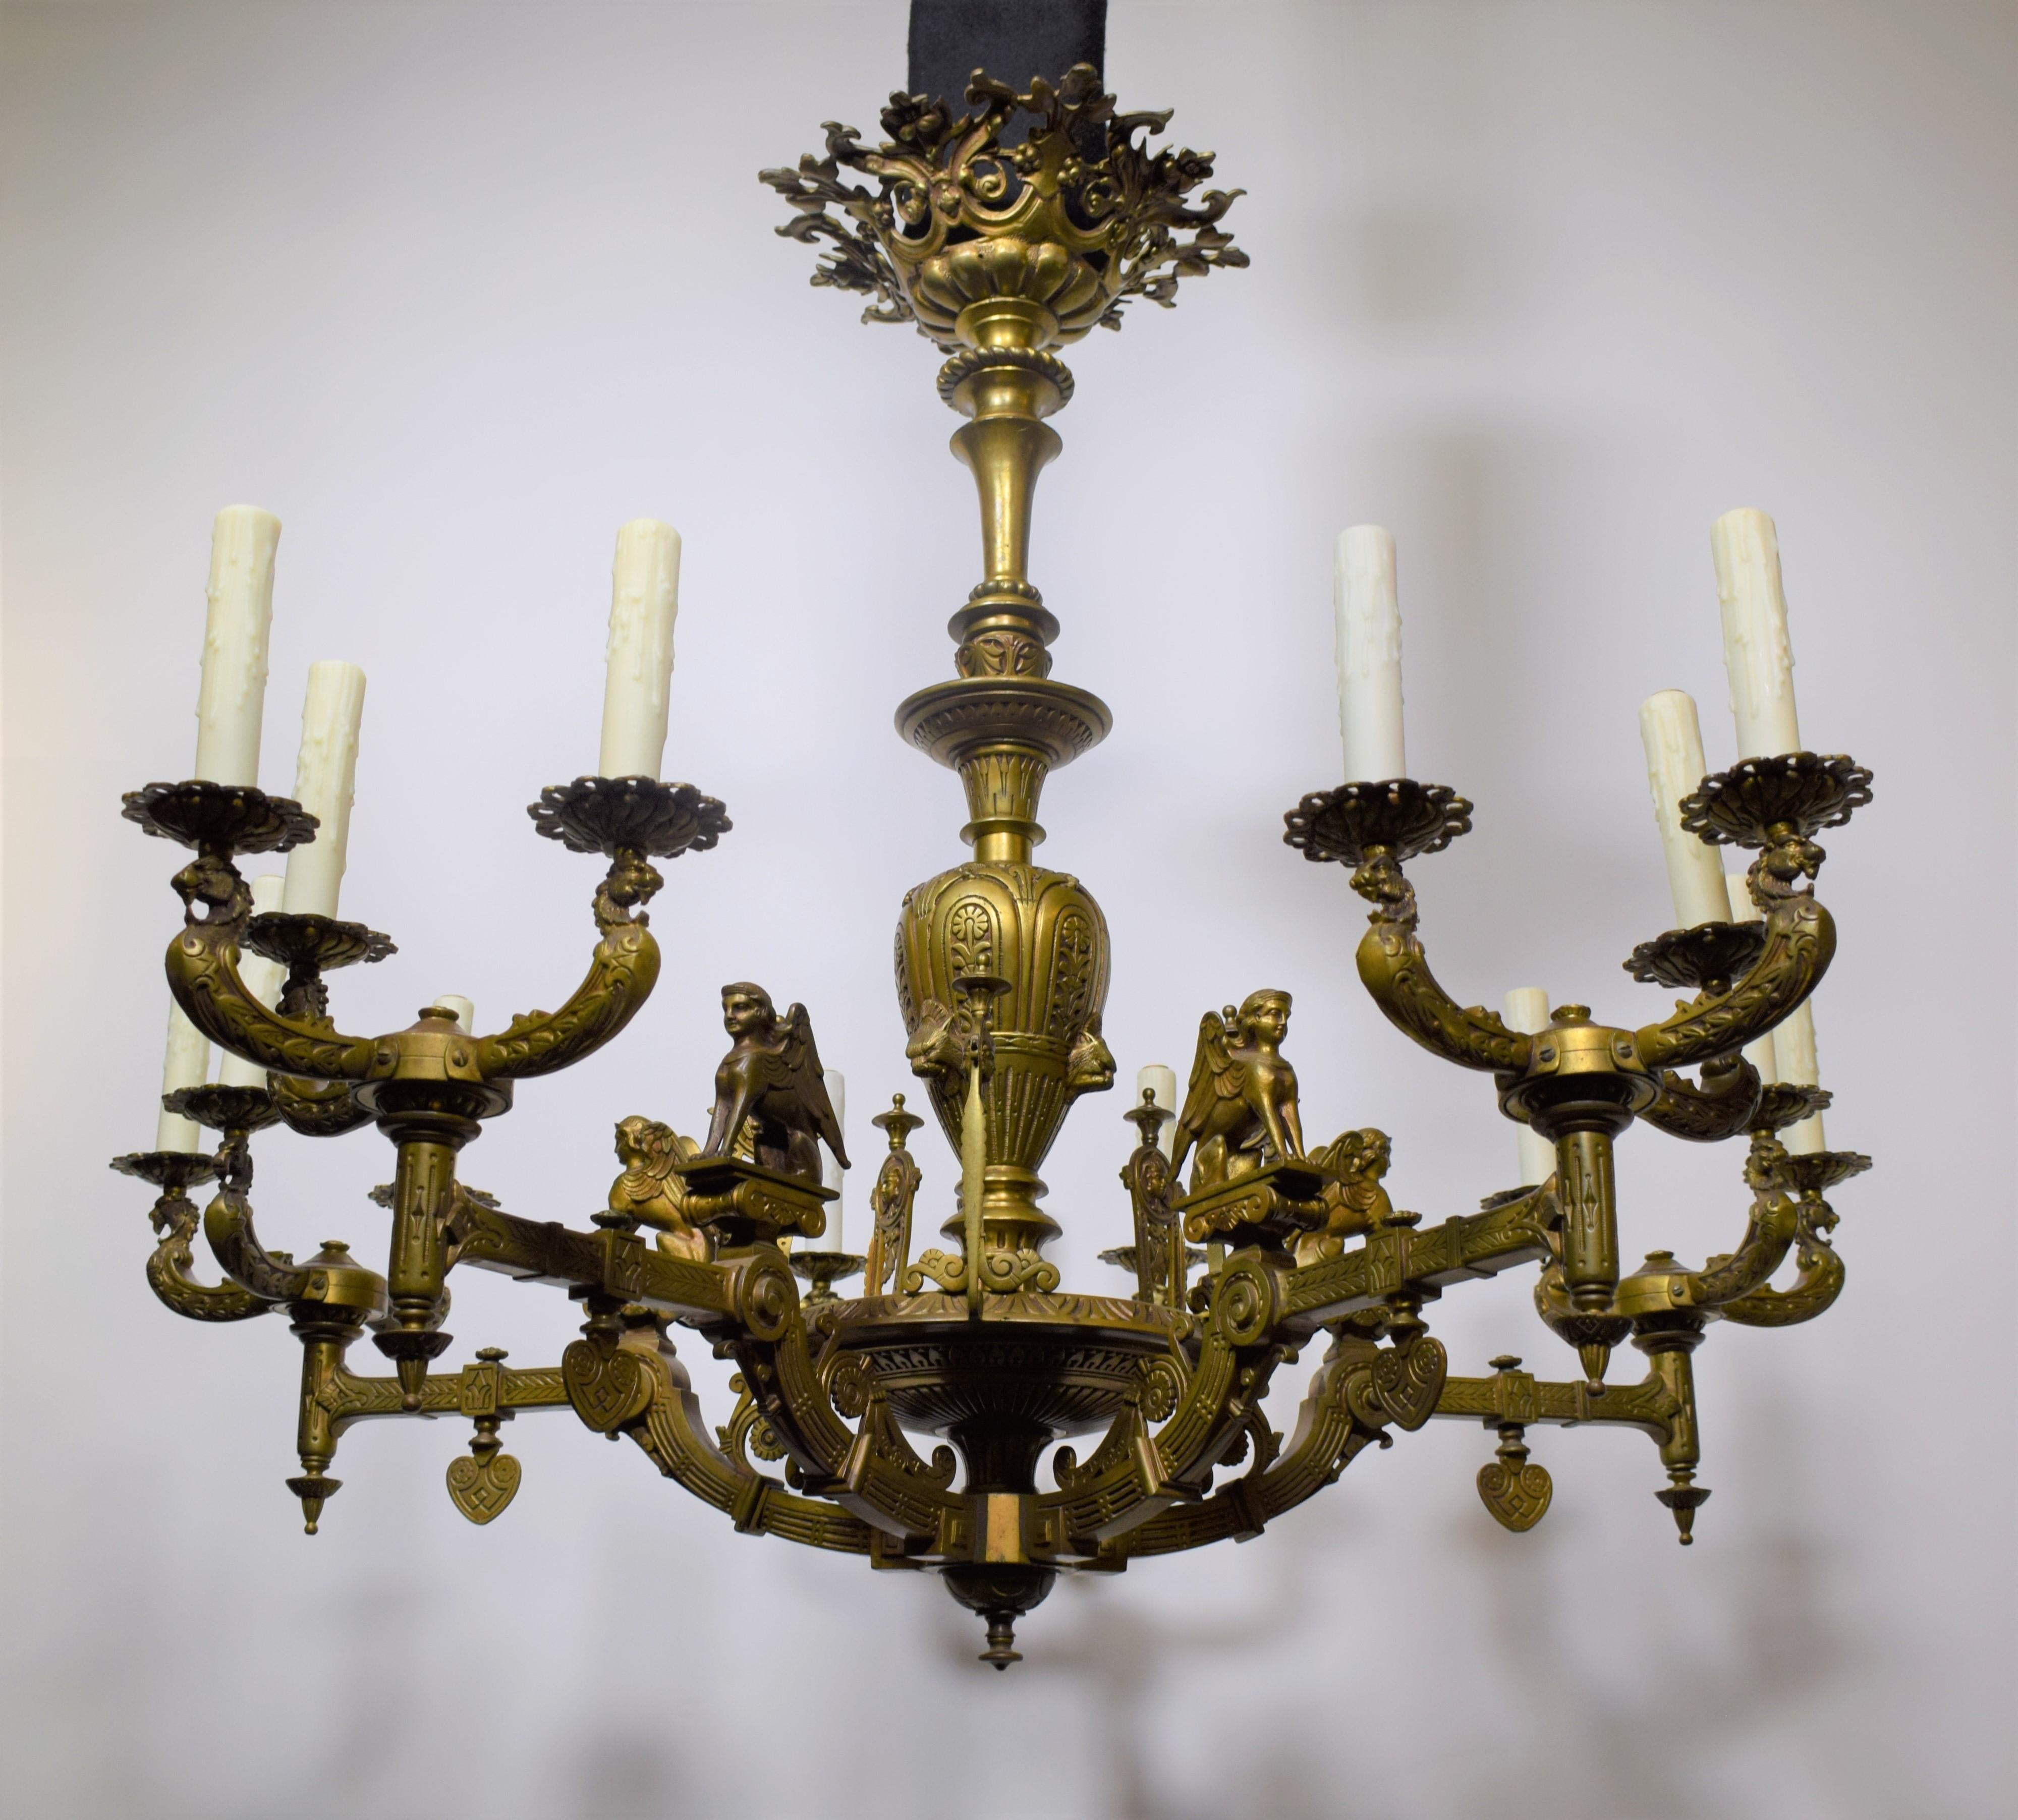 An Important and Unusual Empire style Chandelier featuring winged Caryatides, masks and stylized gas keys.
18 lights. Circa 1880. Measures: Height 38